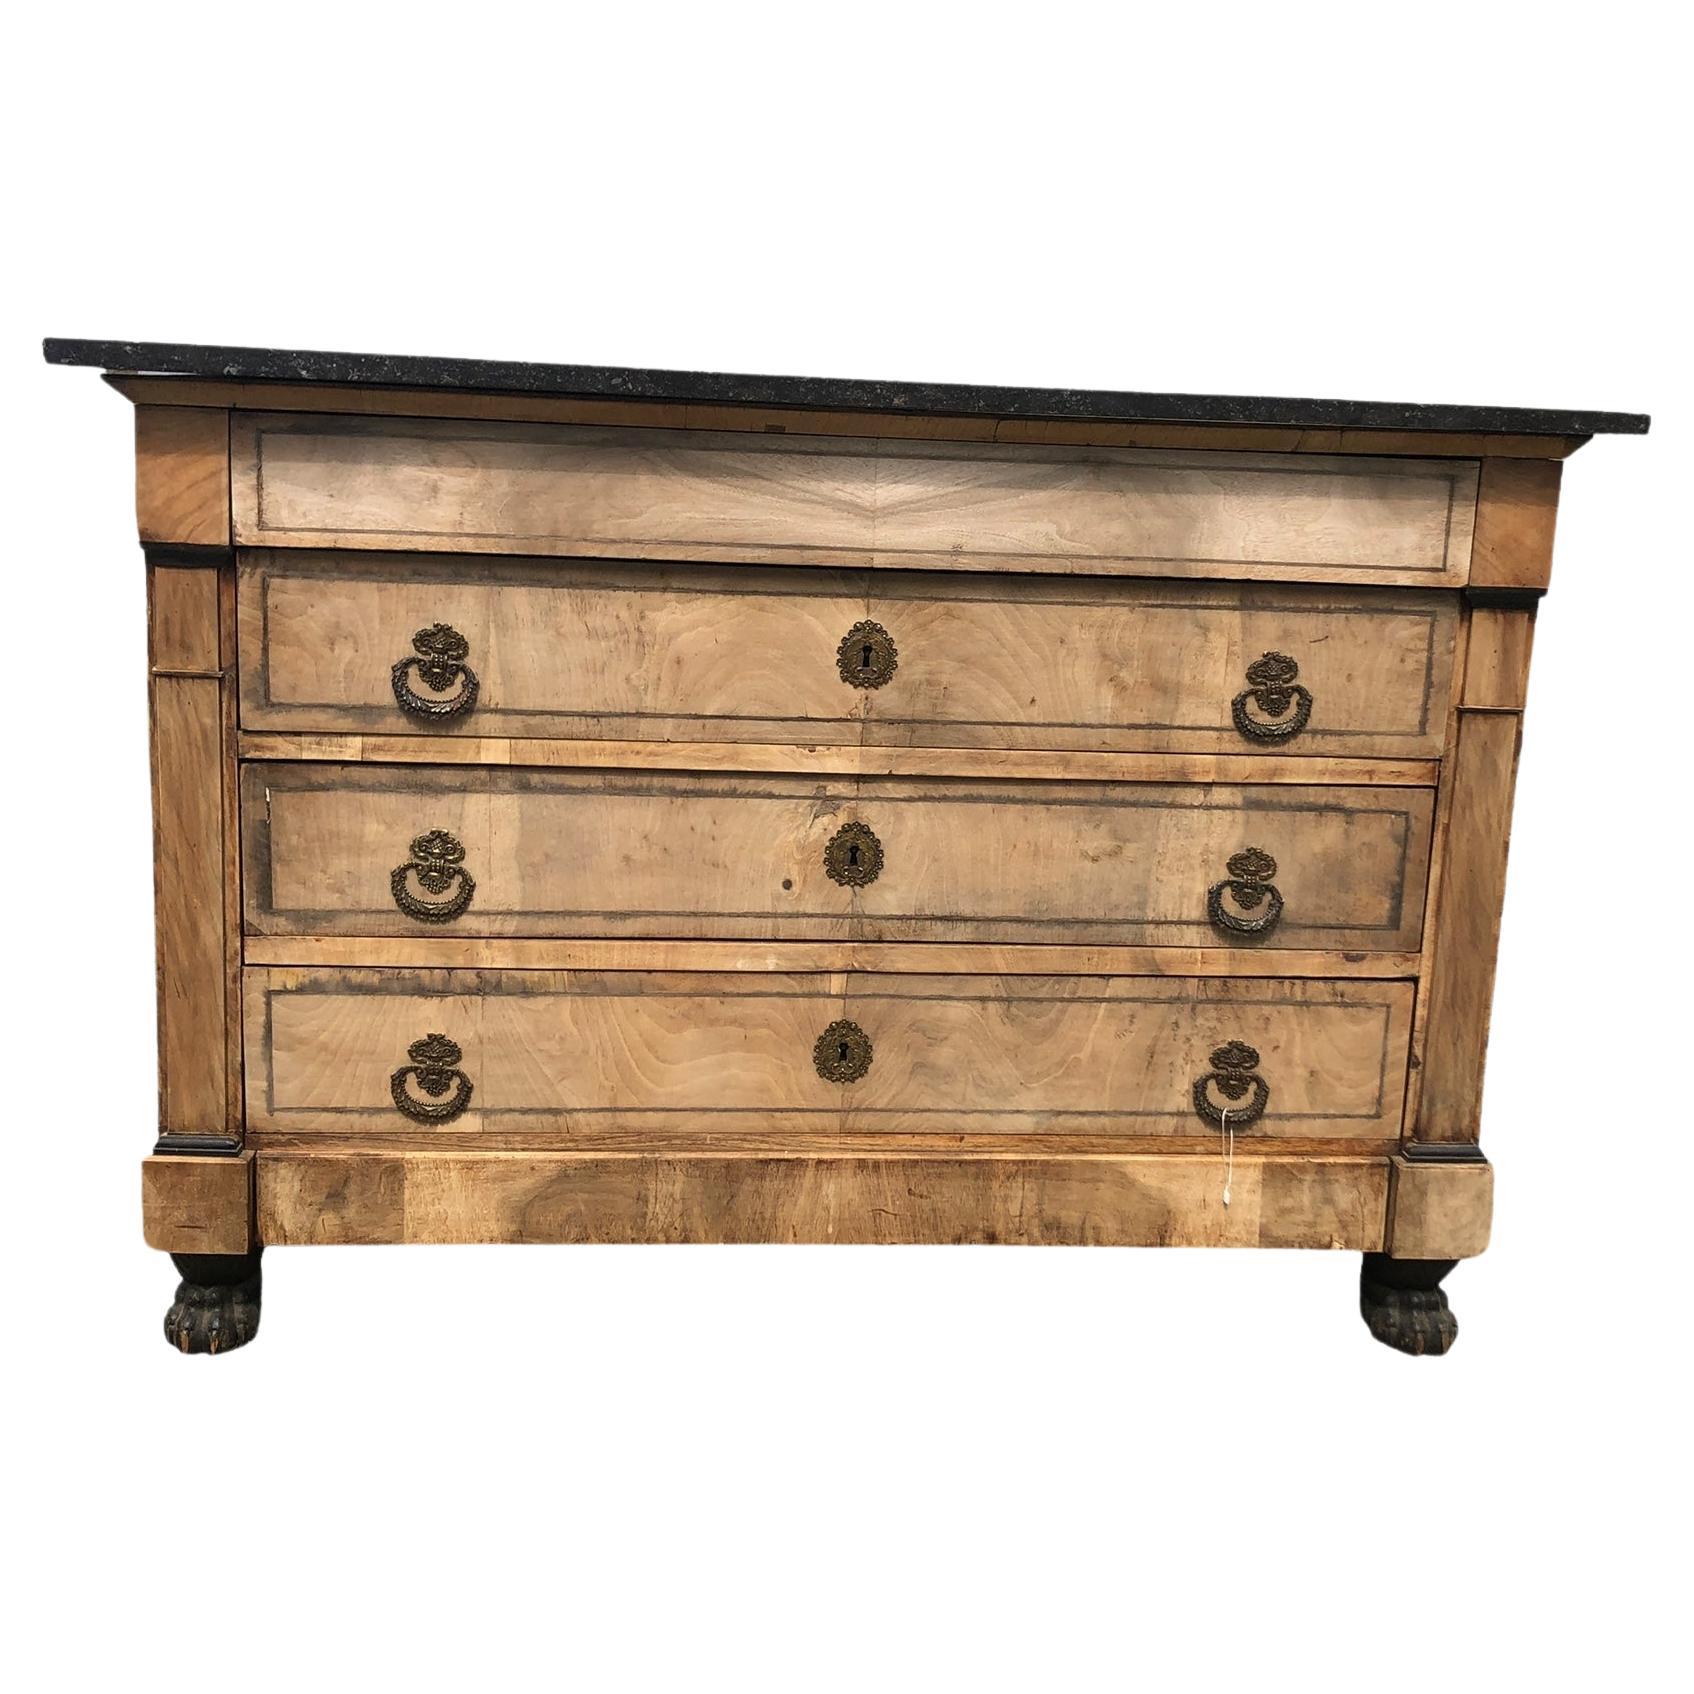 Belgian Black Marble Commodes and Chests of Drawers